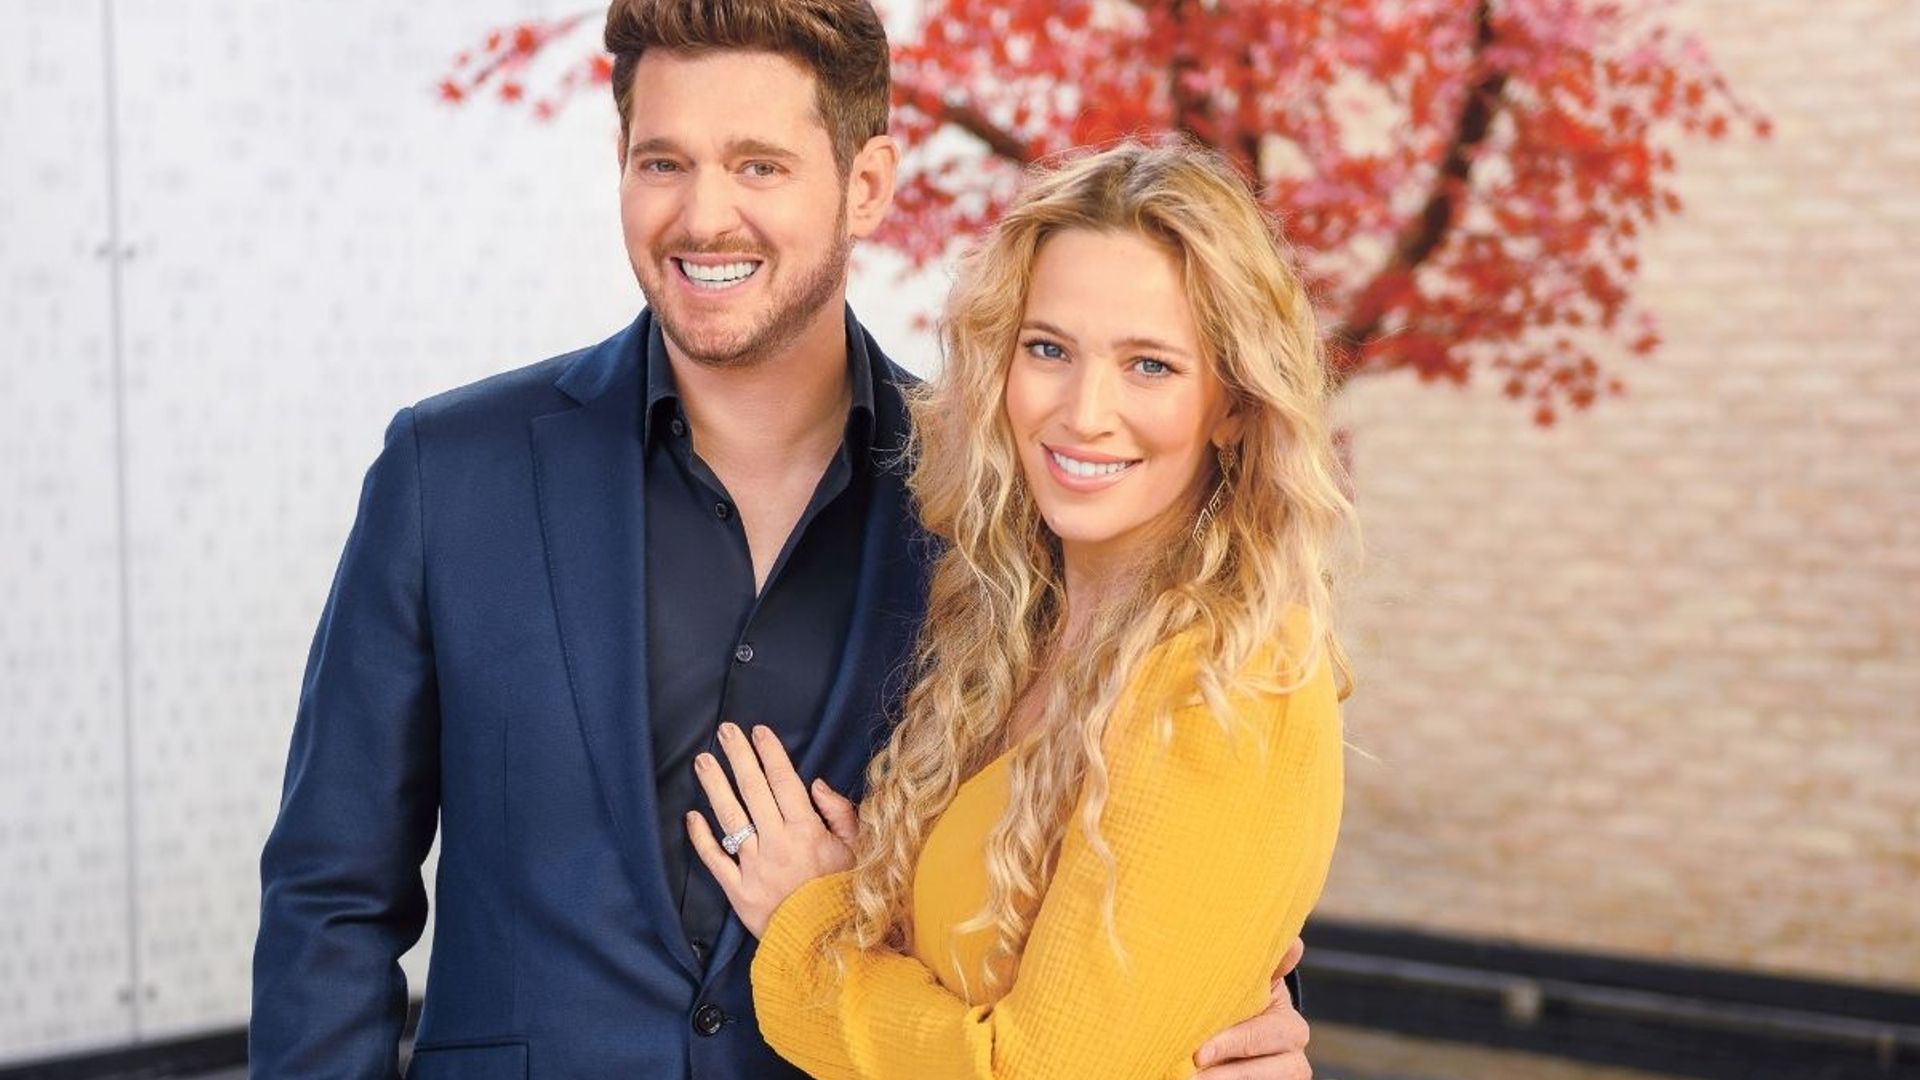 Exclusive: Michael Bublé and Luisana Lopilato open up on their pregnancy, love story and much more in their first joint interview